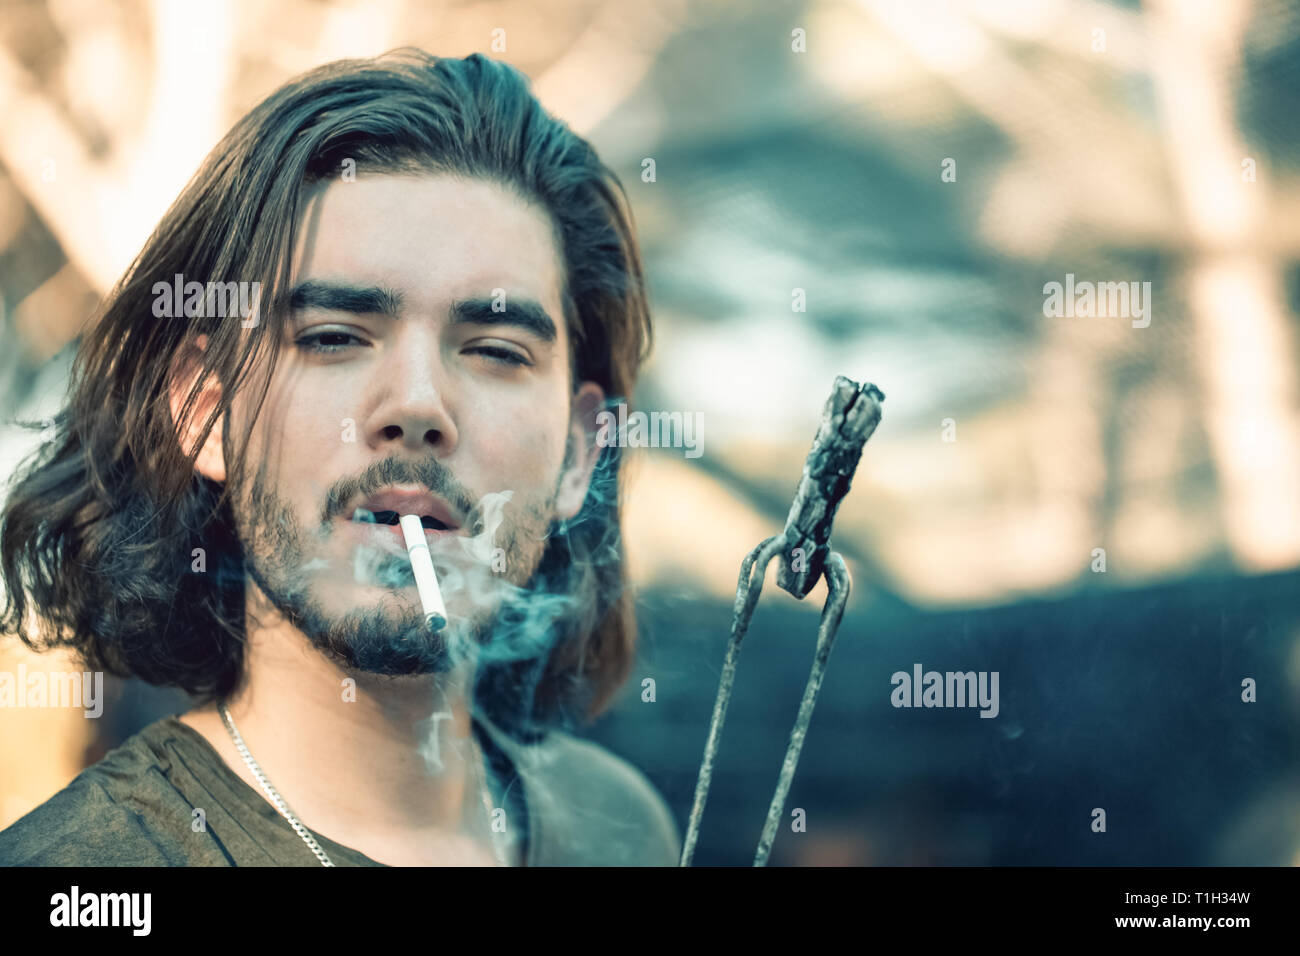 Portrait of a handsome young man with a beard, lighting a cigarette from charcoal, holding his by barbecue tongs. Stock Photo